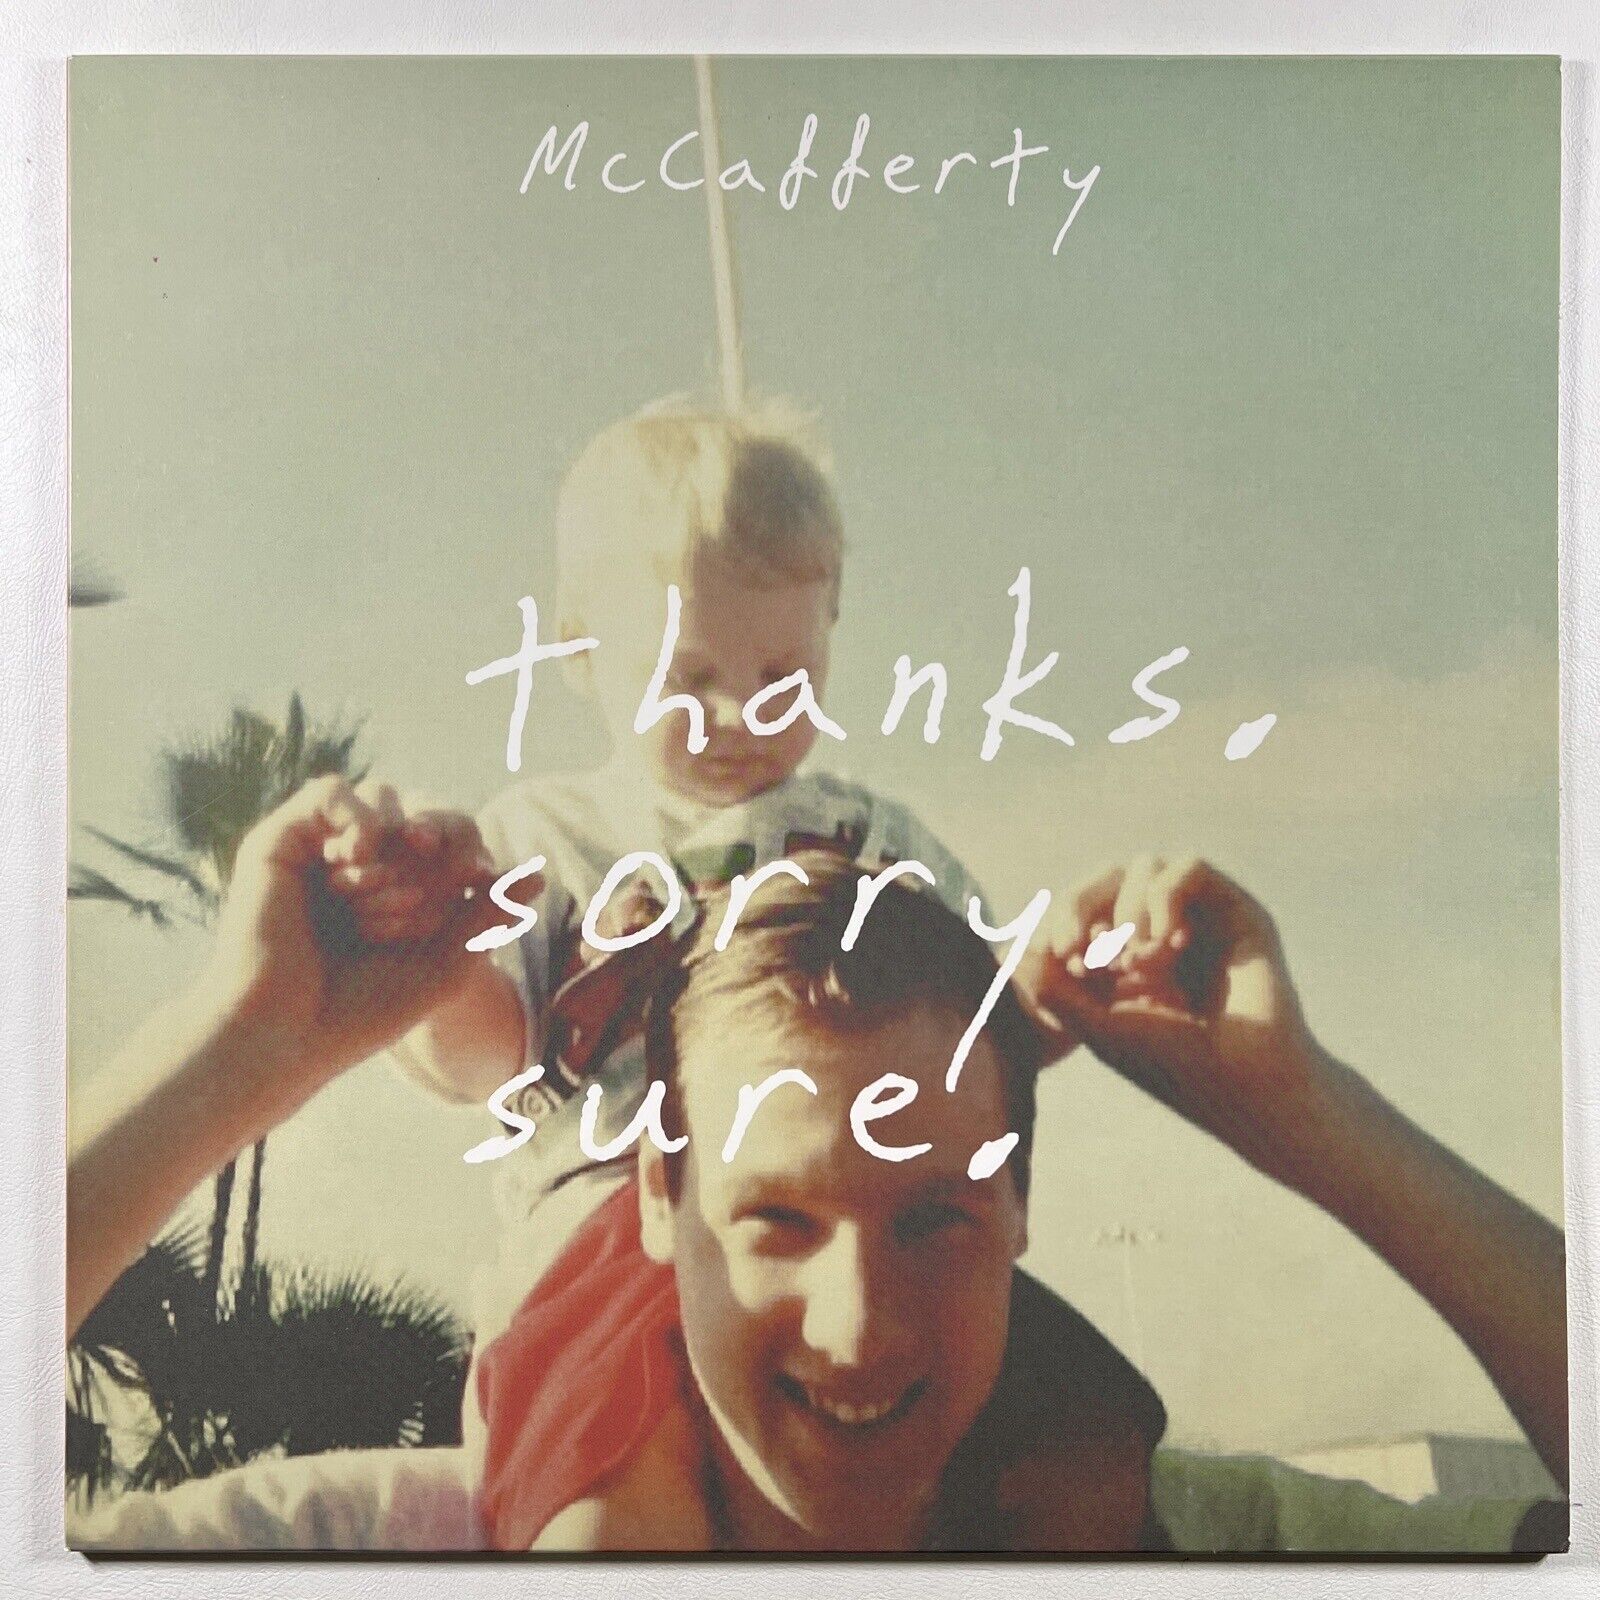 Mccafferty “Thanks. Sorry. Sure” EP/Take This … T3H-032 (EX) Green/White Insert